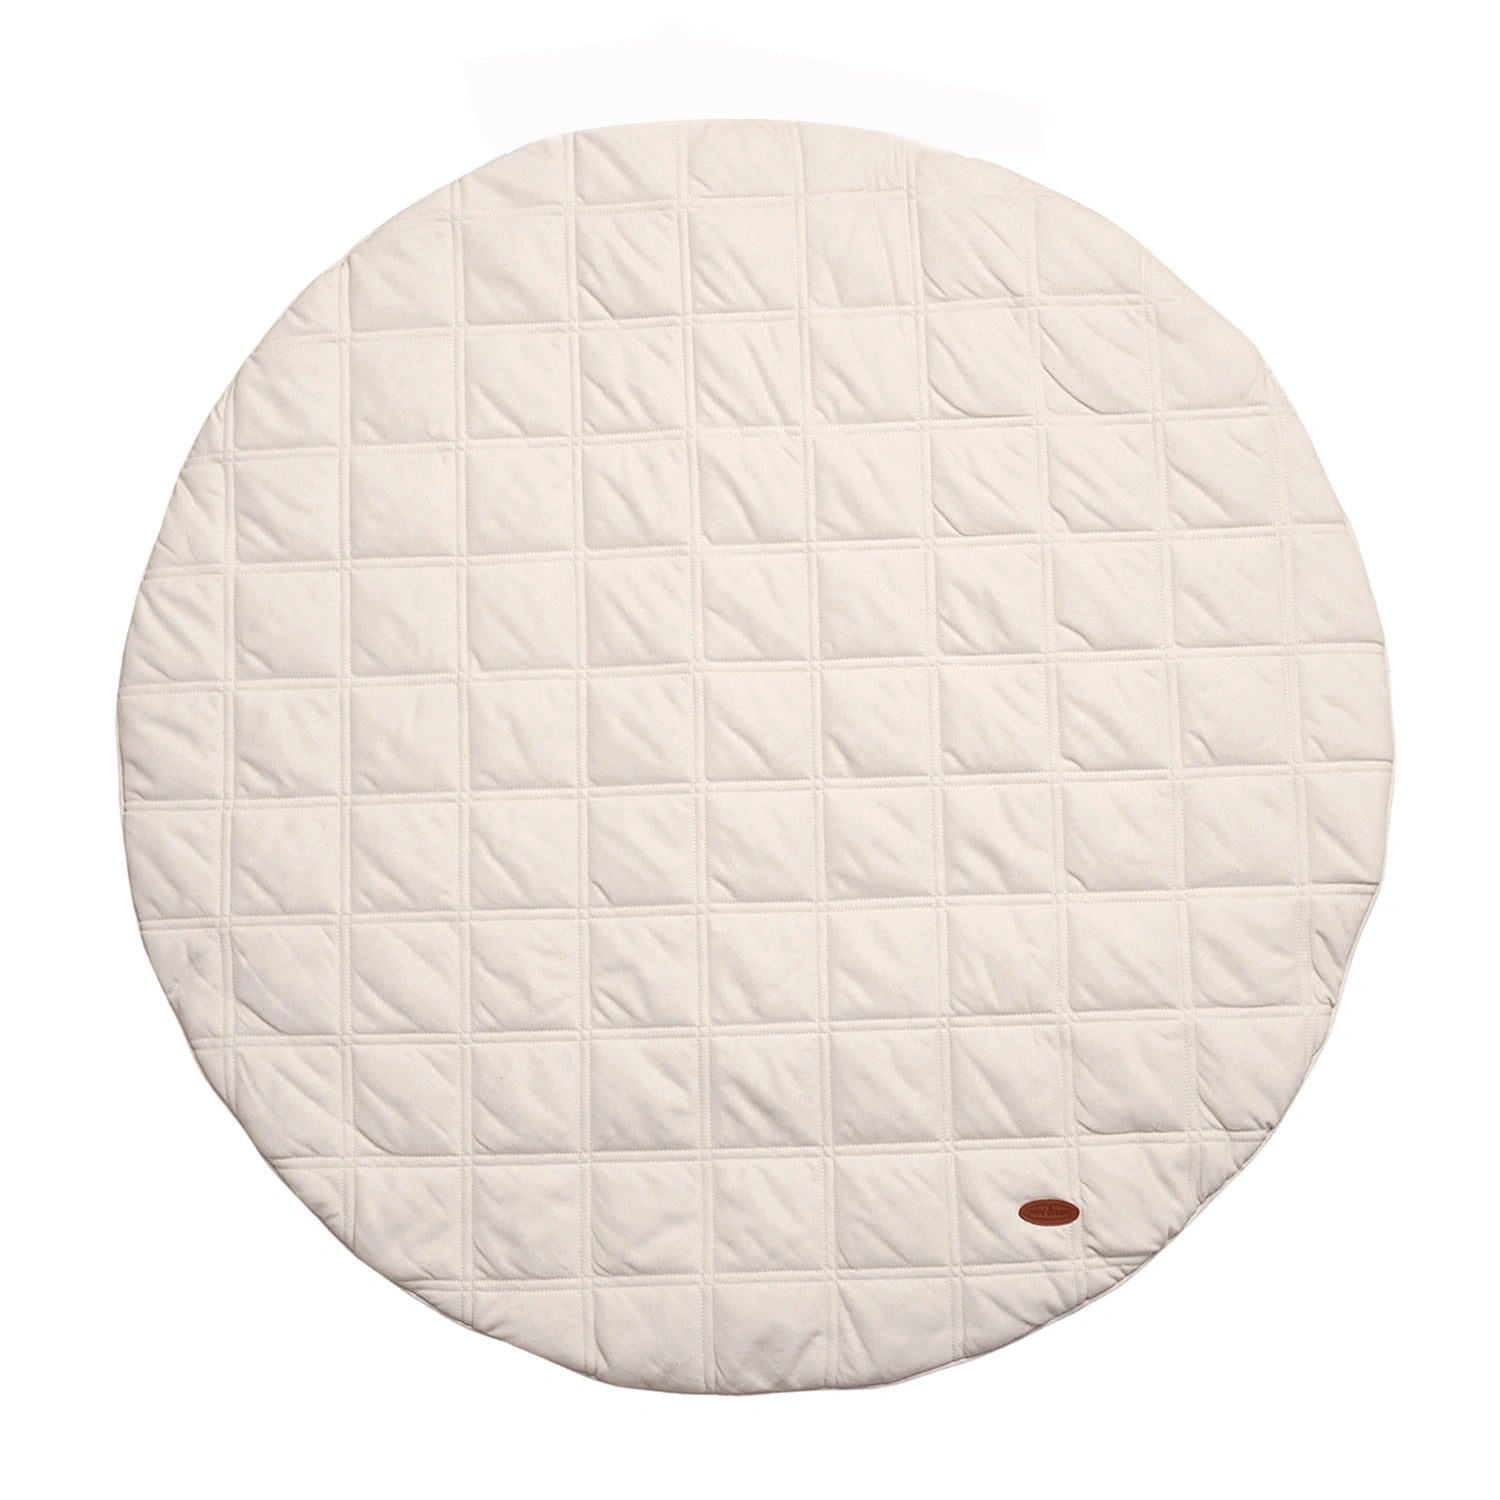 An image of Buy Organic Cotton Baby Play Mat: Soft and Safe Play